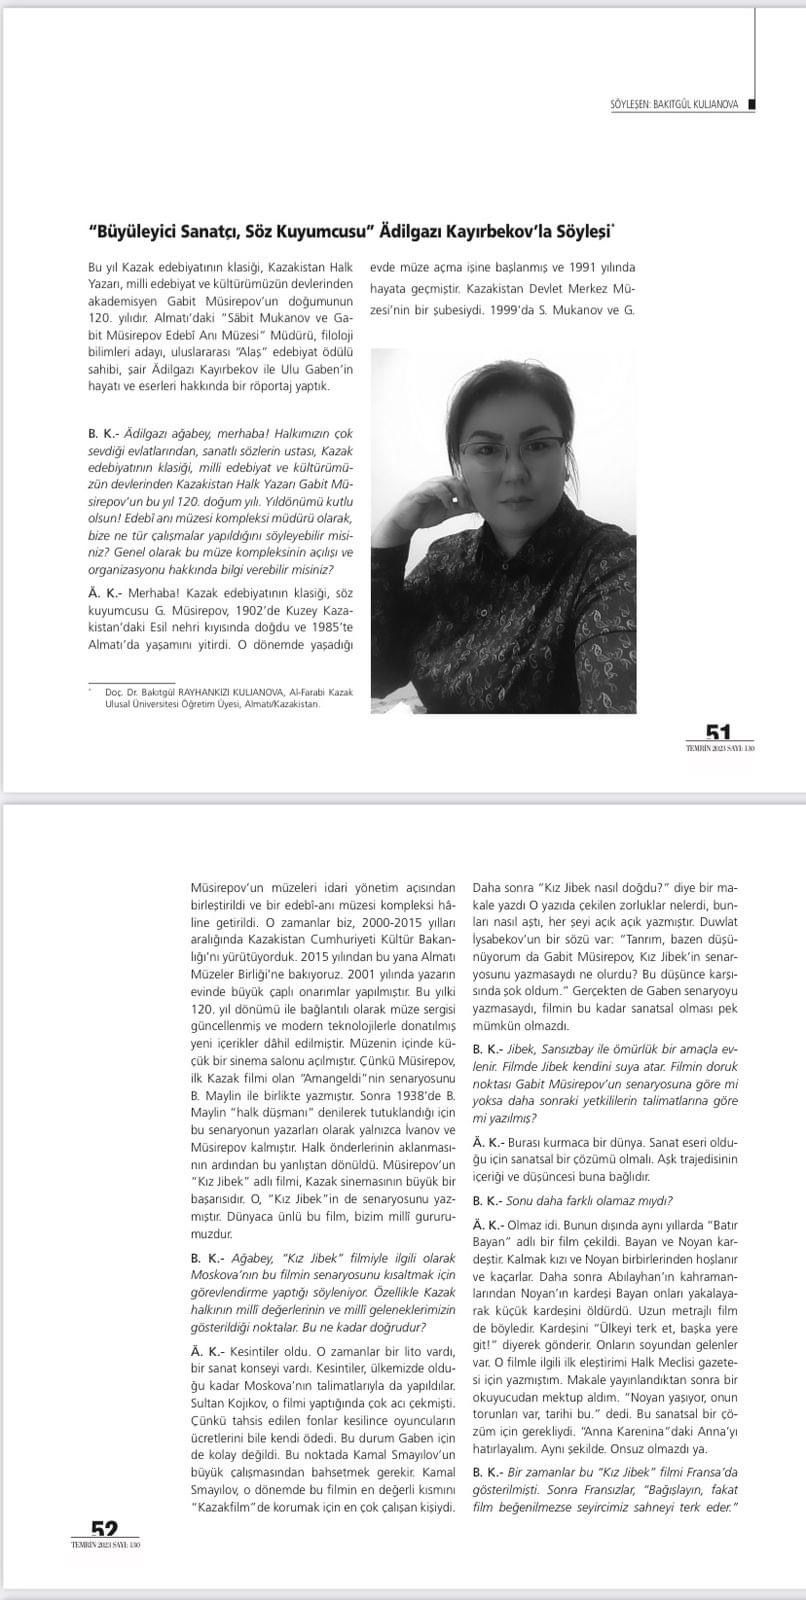 The scholar of A. Baitursynuly Department of Kazakh Linguistics gave an interview to the Turkish magazine. 